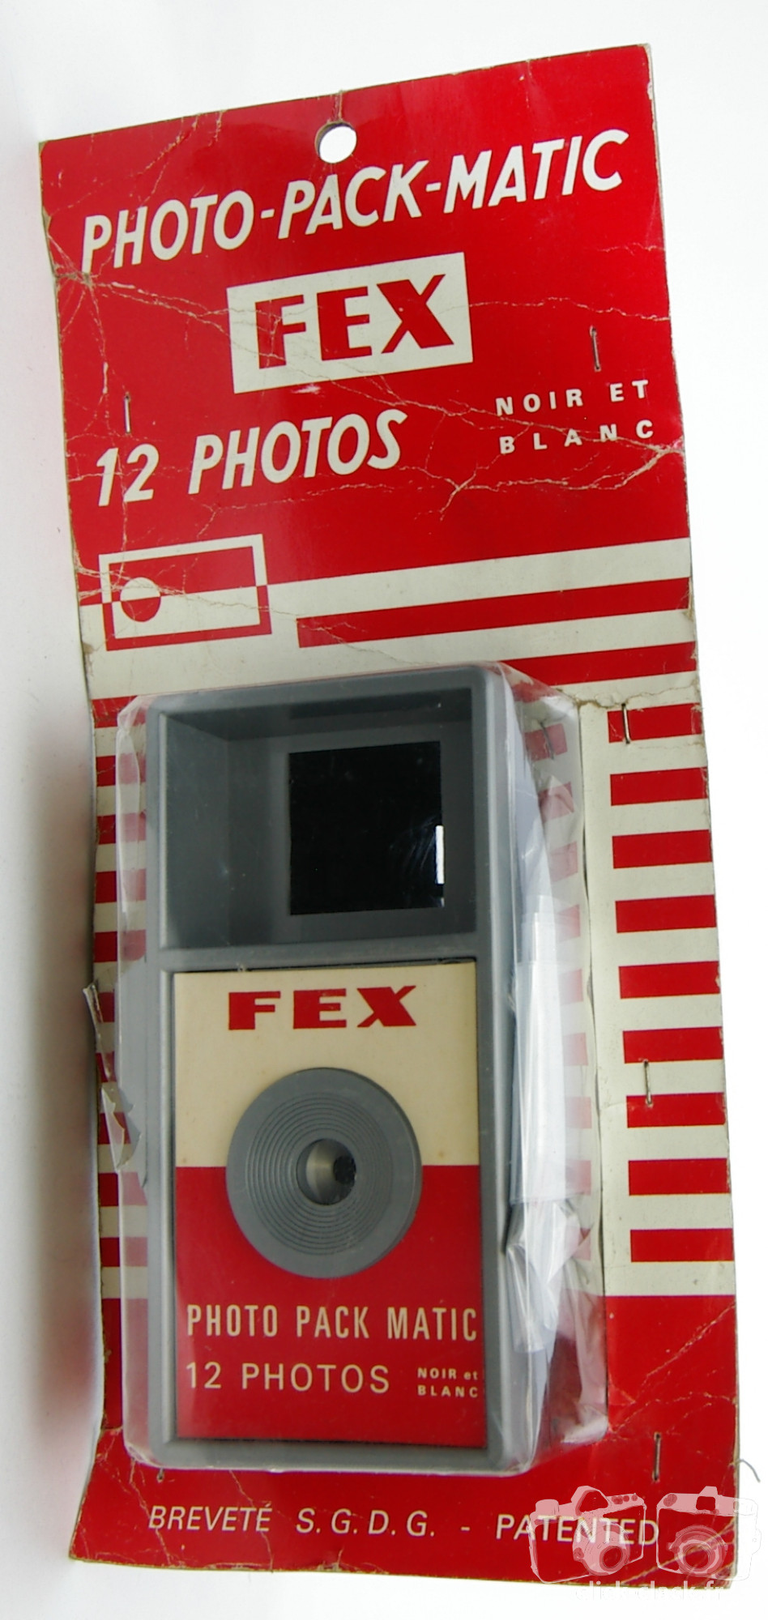 Fex-Indo - Photo Pack Matic version 3 neuf dans son blister